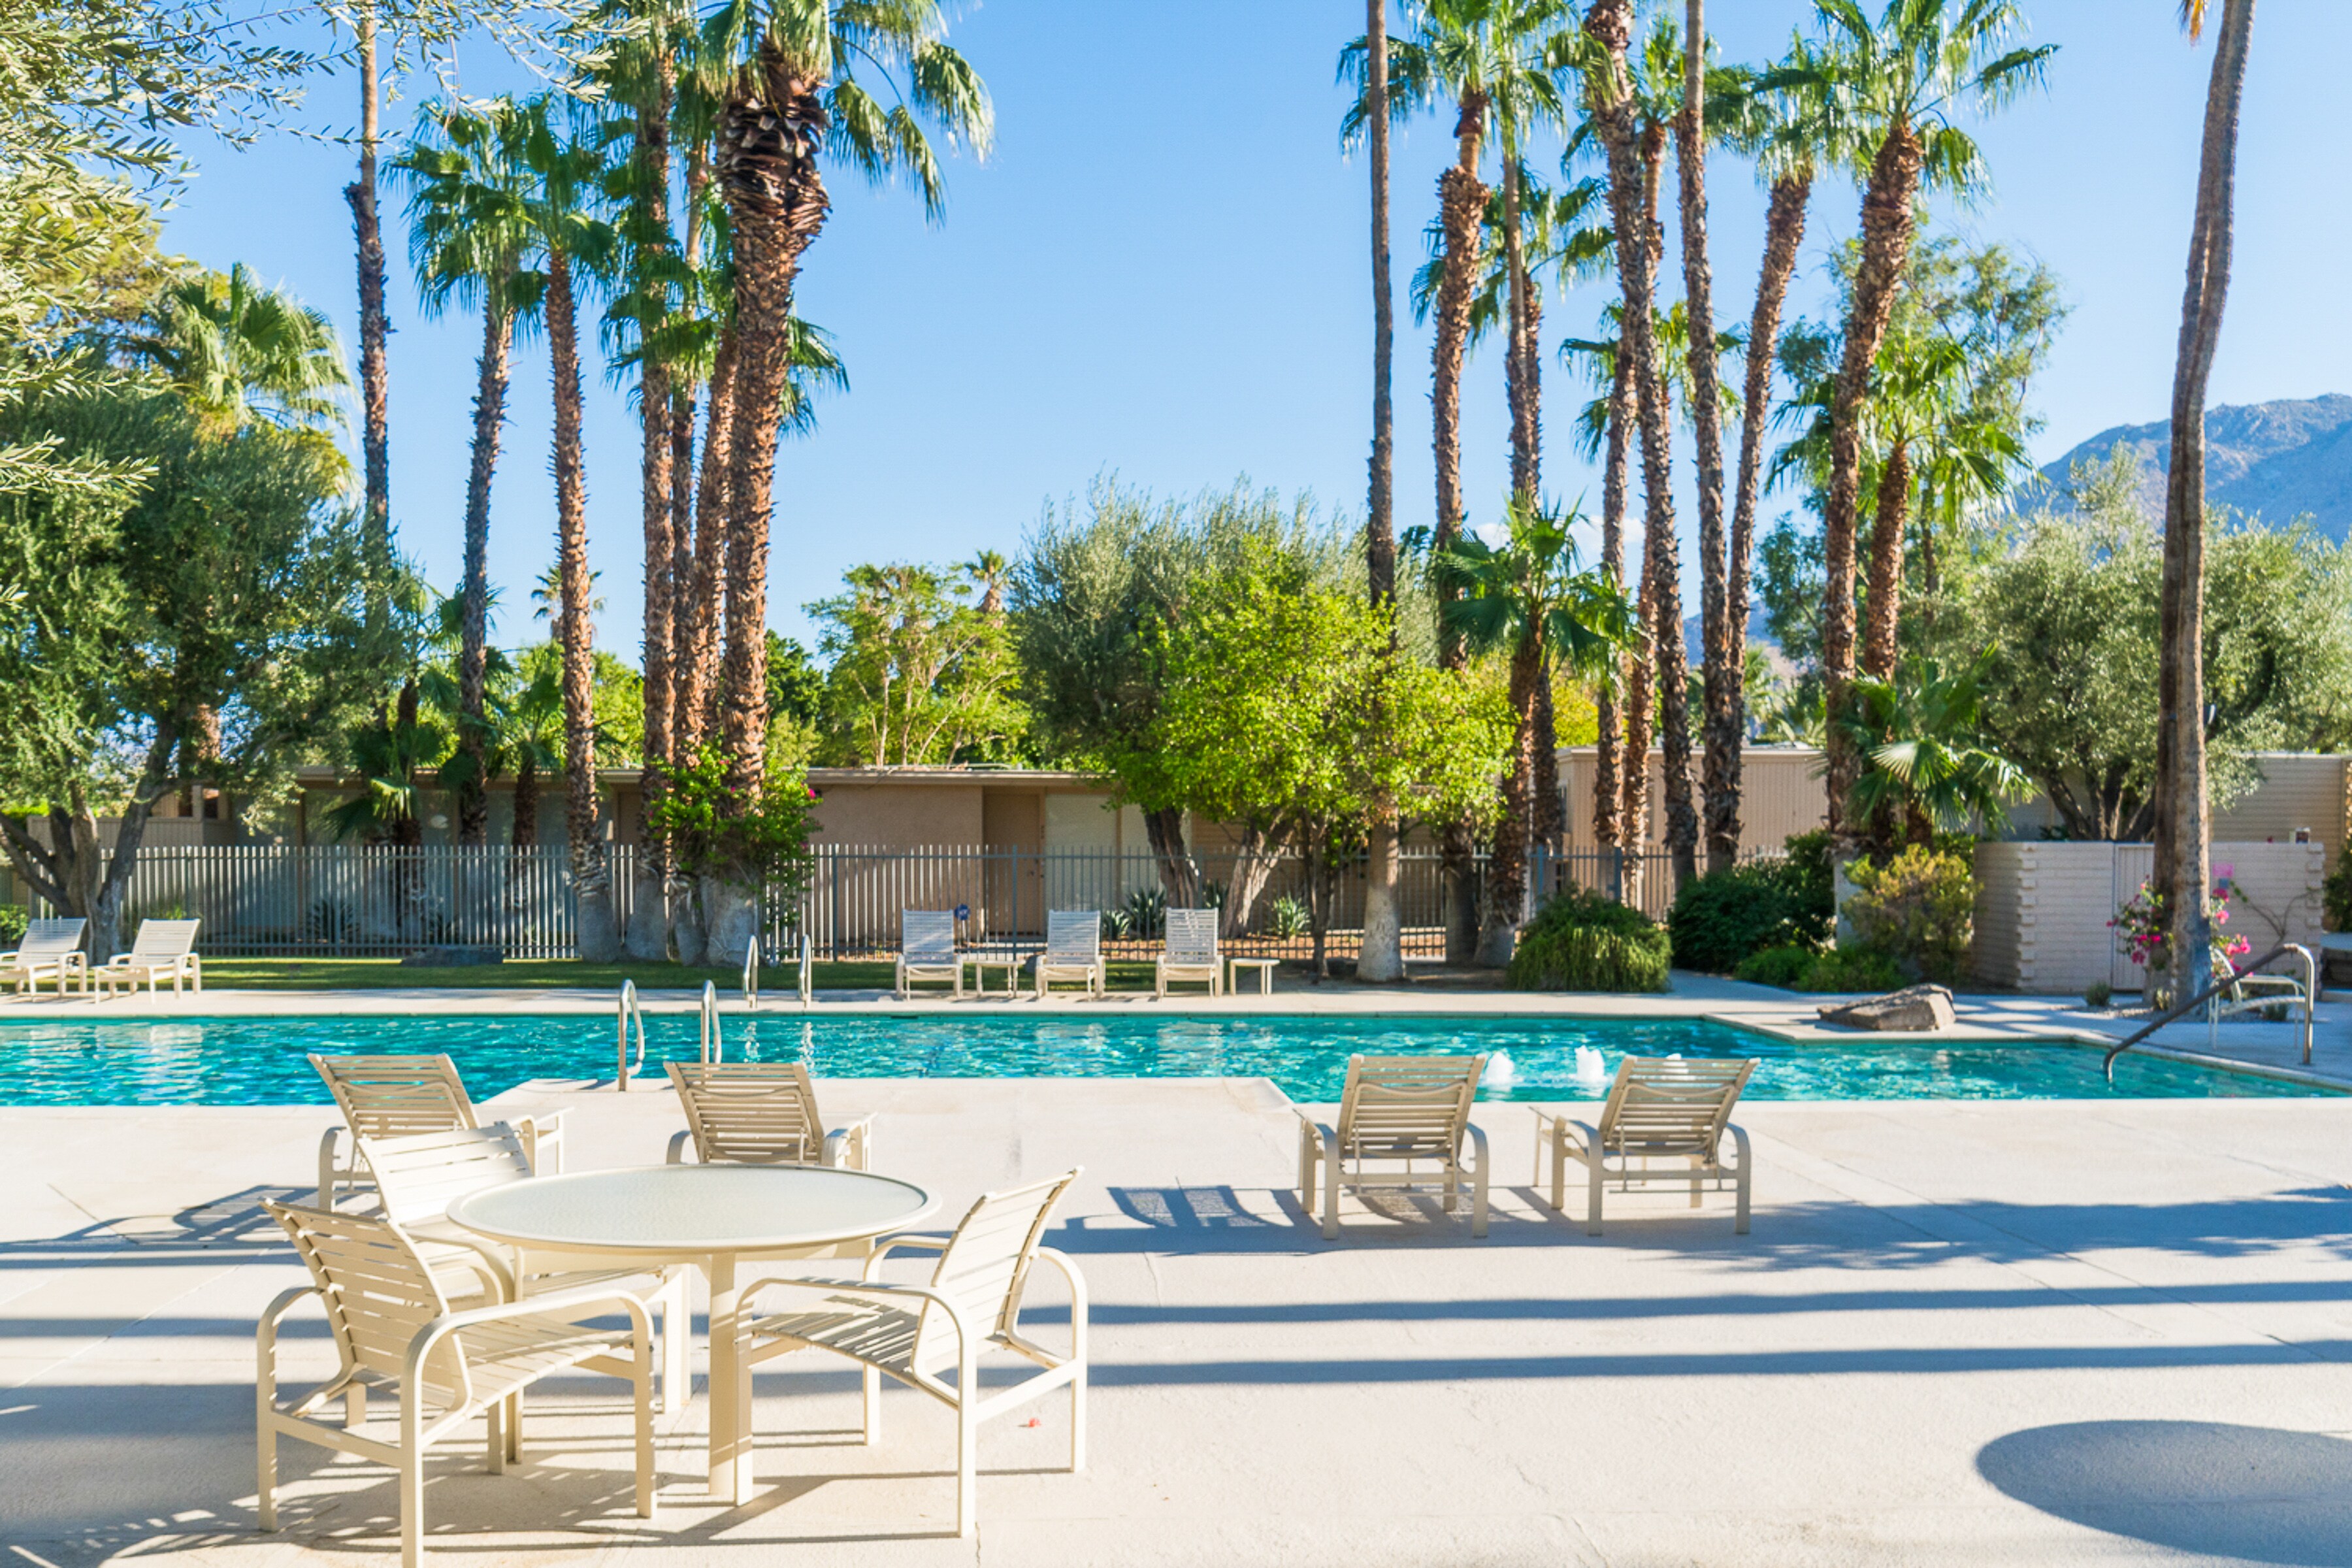 Spend sun-soaked days by the pool.